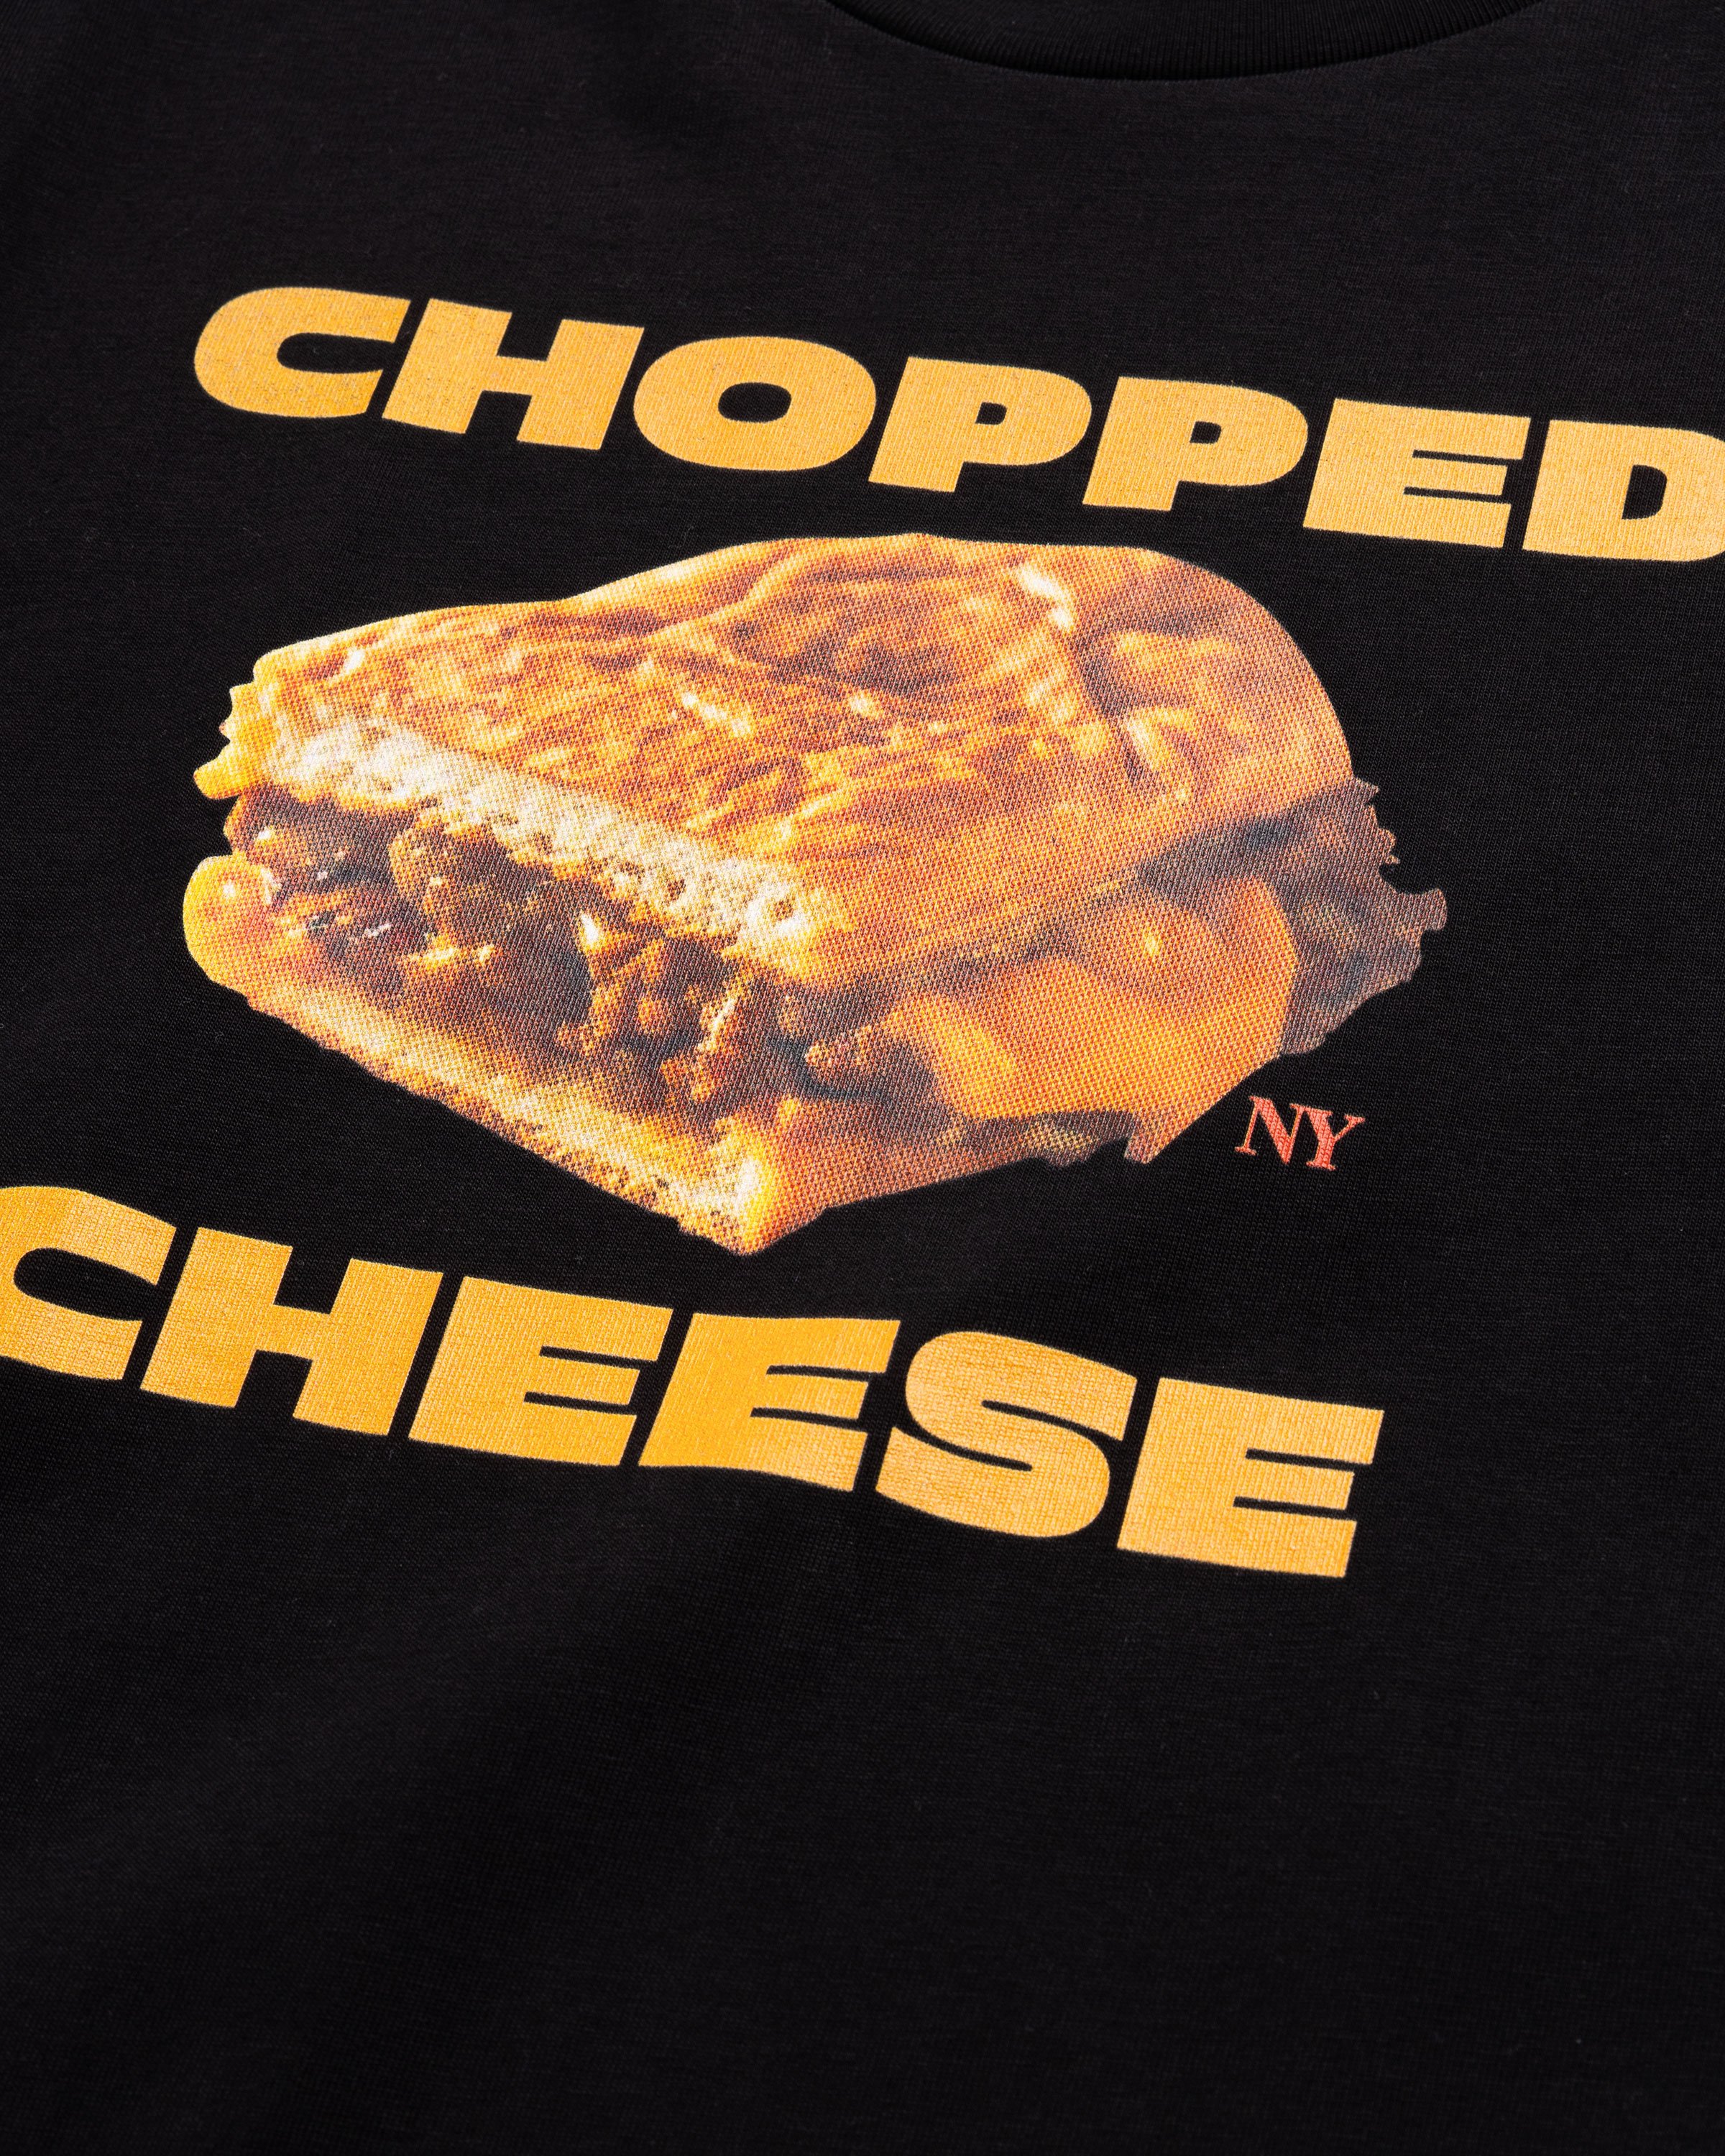 At The Moment x Highsnobiety - Chopped Cheese T-Shirt - Clothing - Black - Image 7